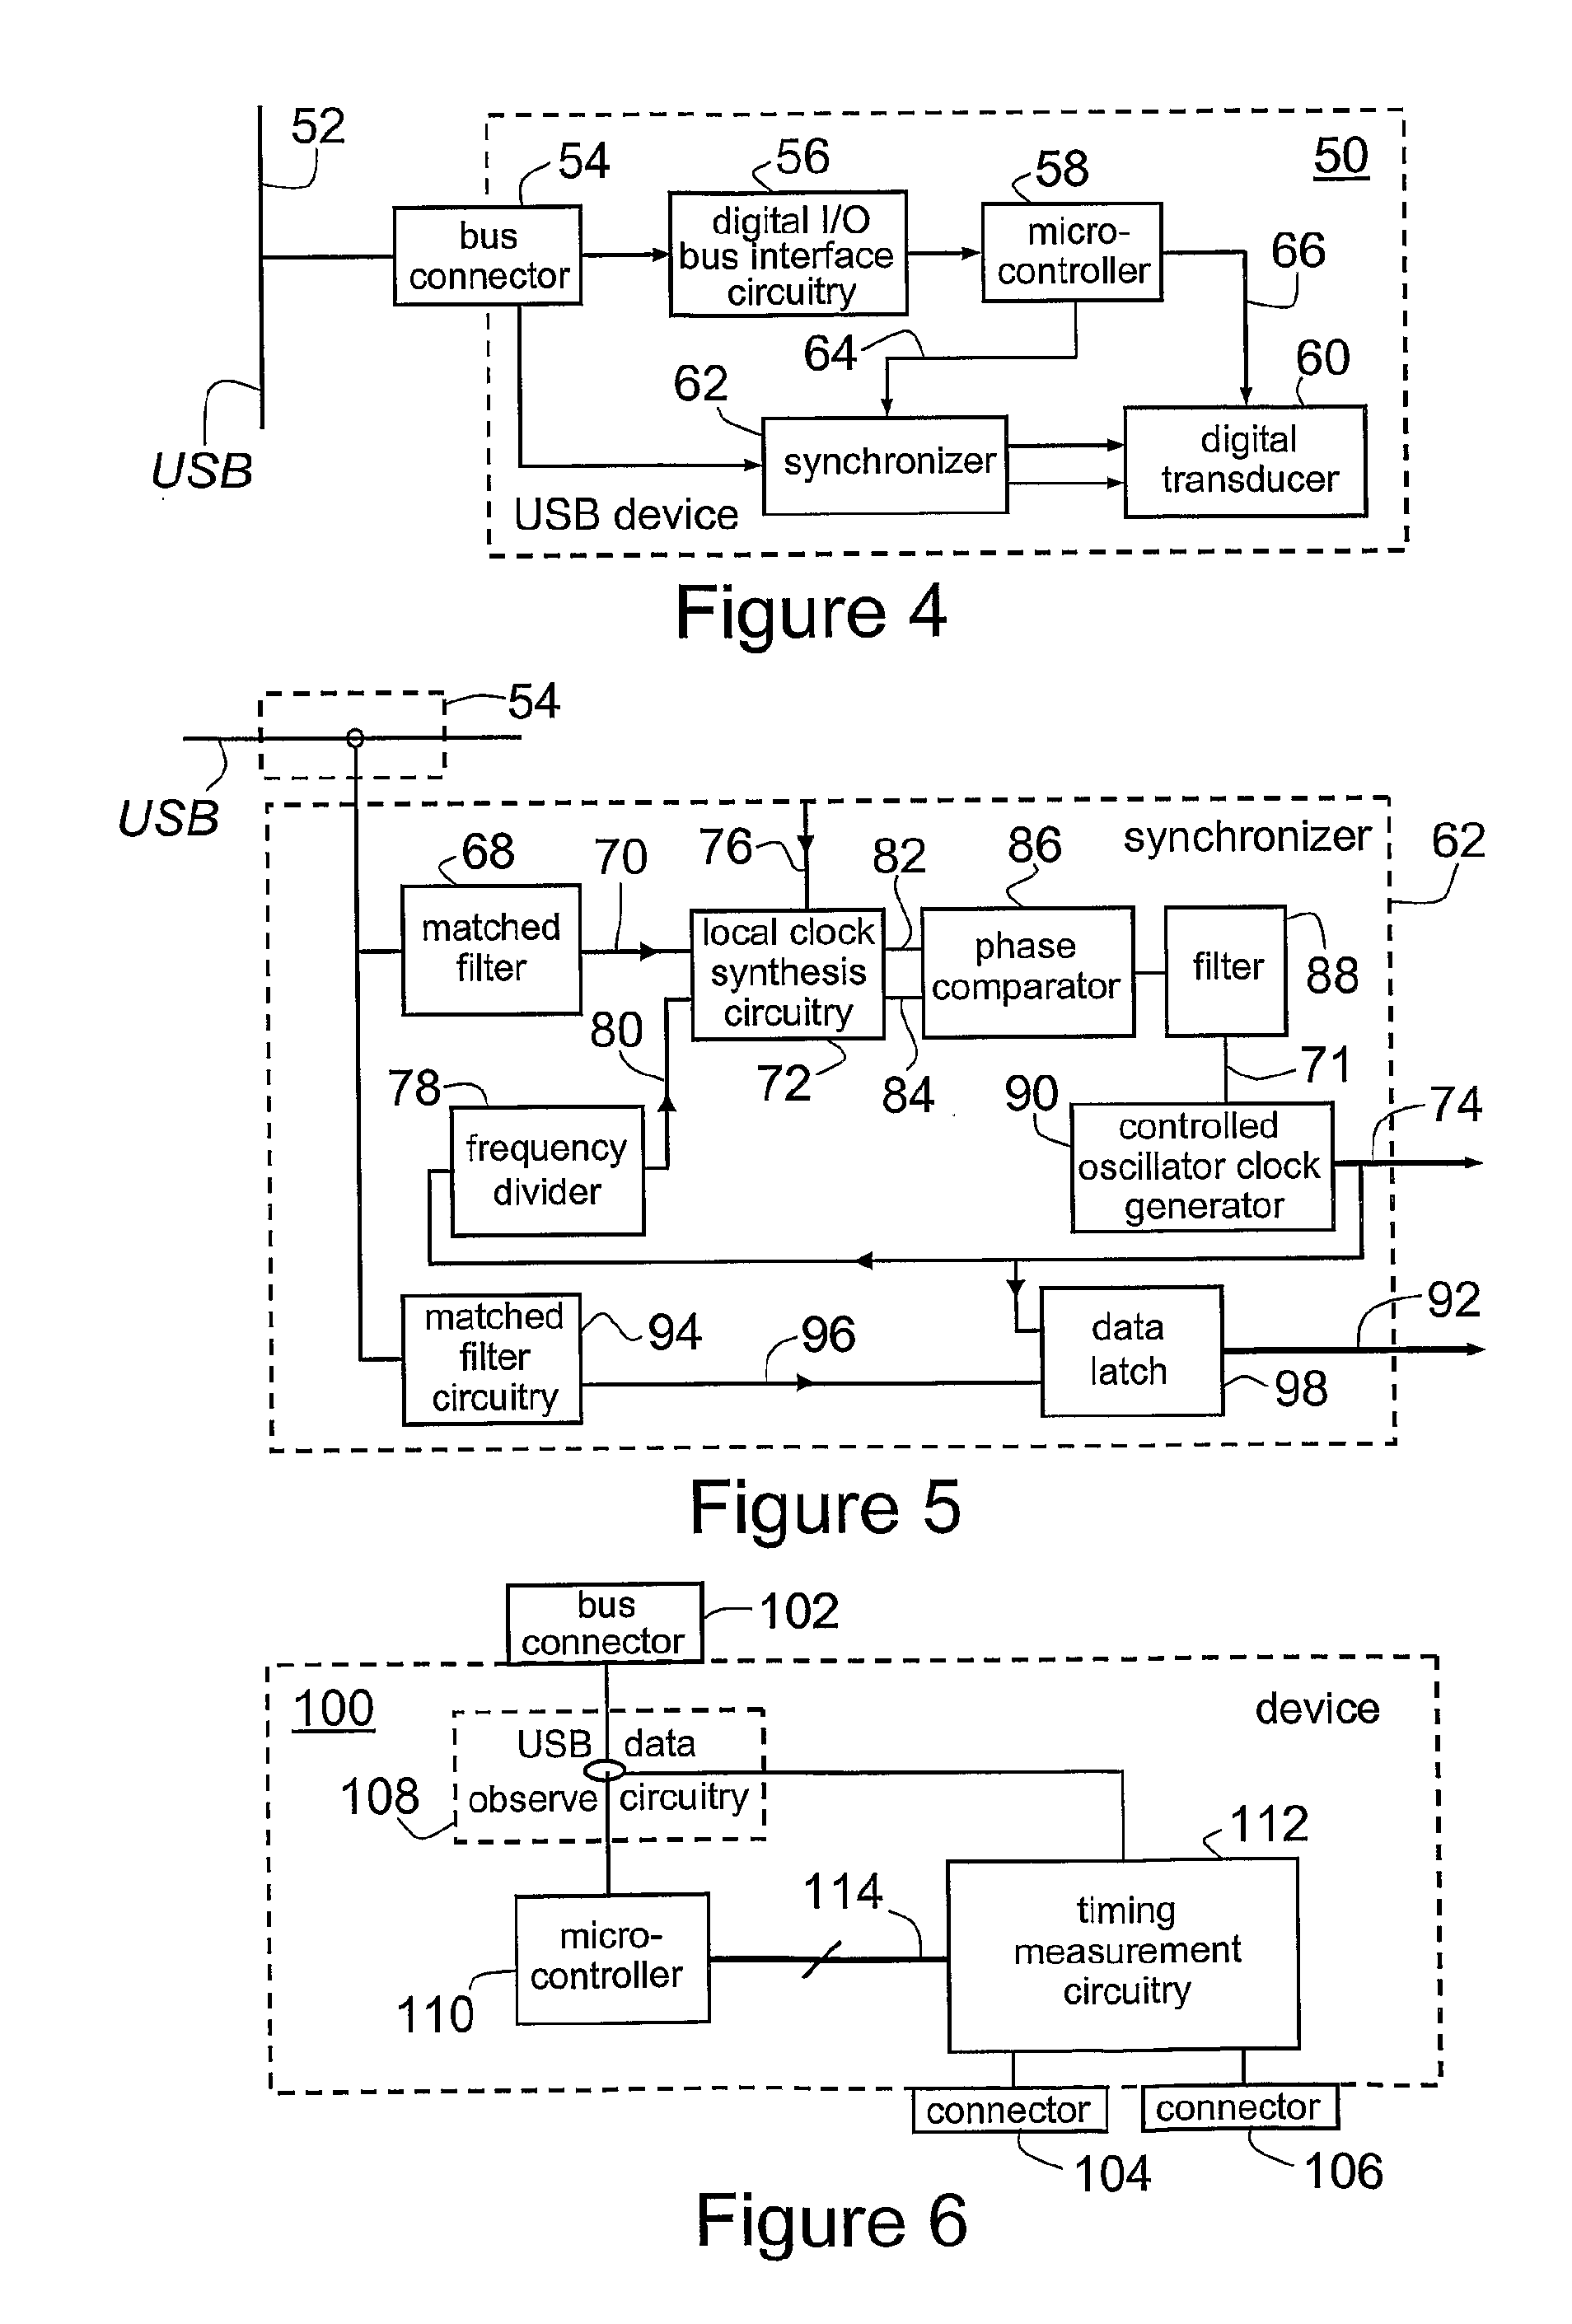 Distributed synchronization and timing system